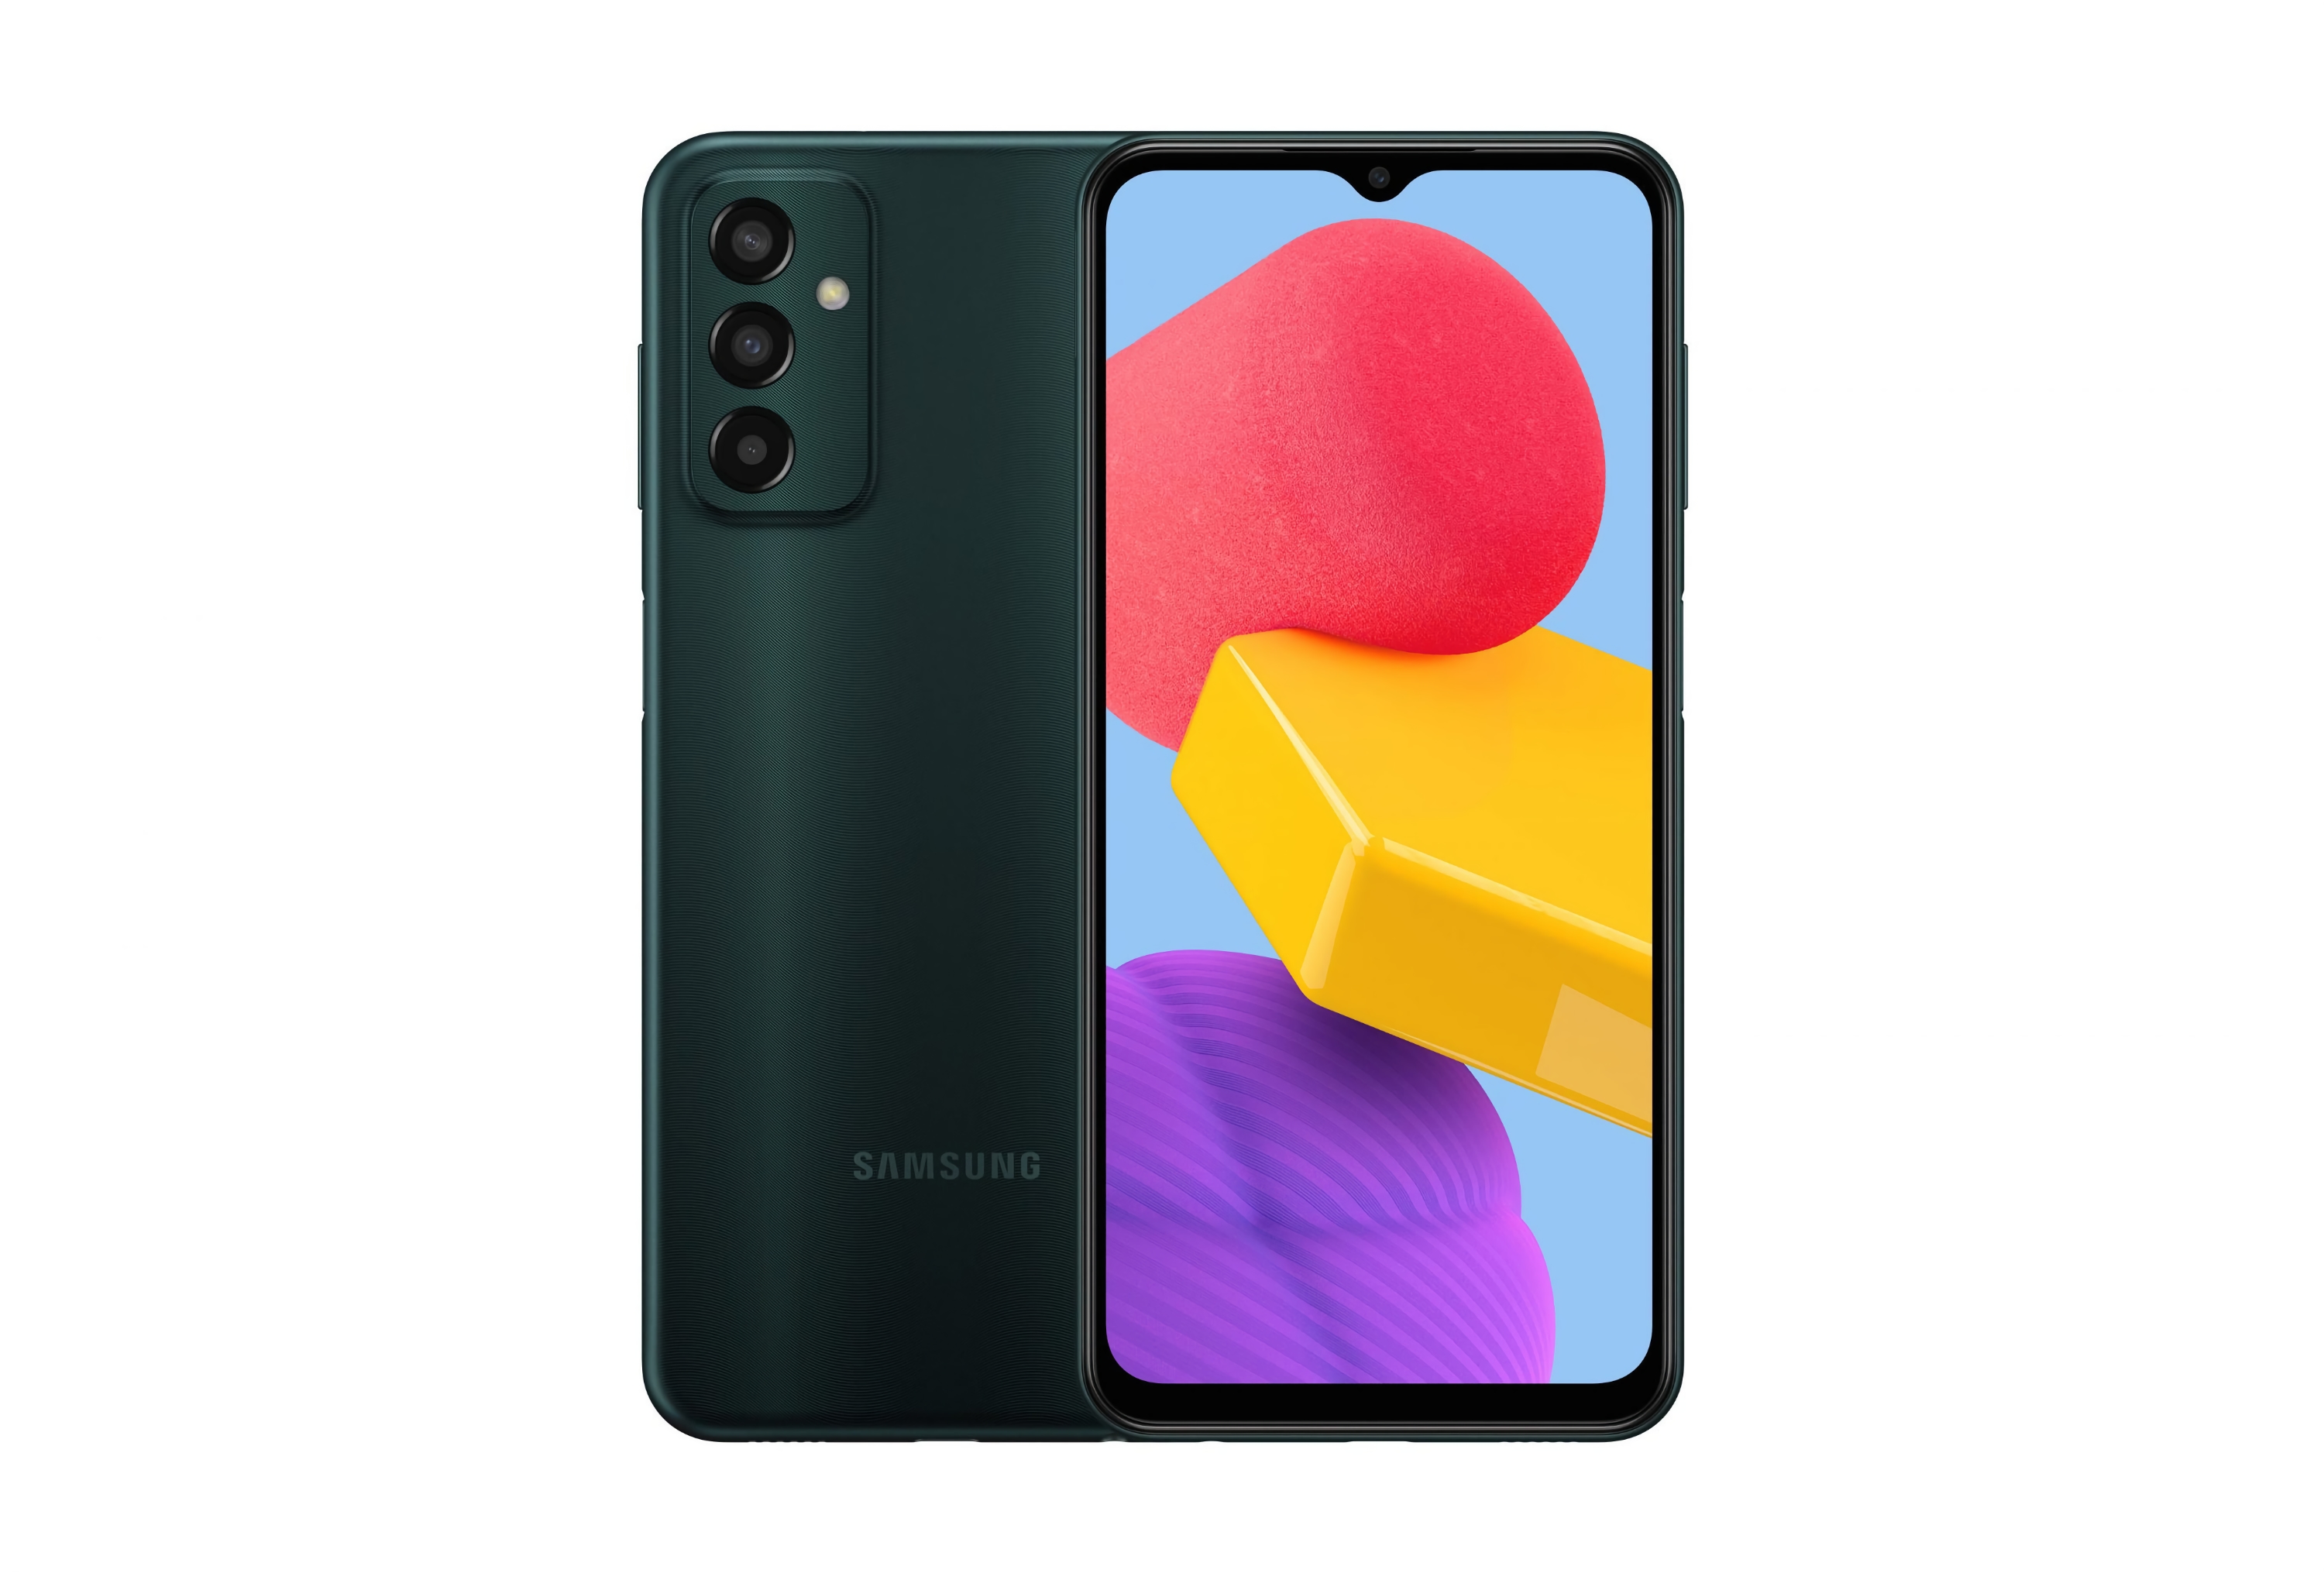 Samsung unveils Galaxy M13 budget smartphone with 50 MP camera, NFC, 5000 mAh battery and Exynos 850 chip